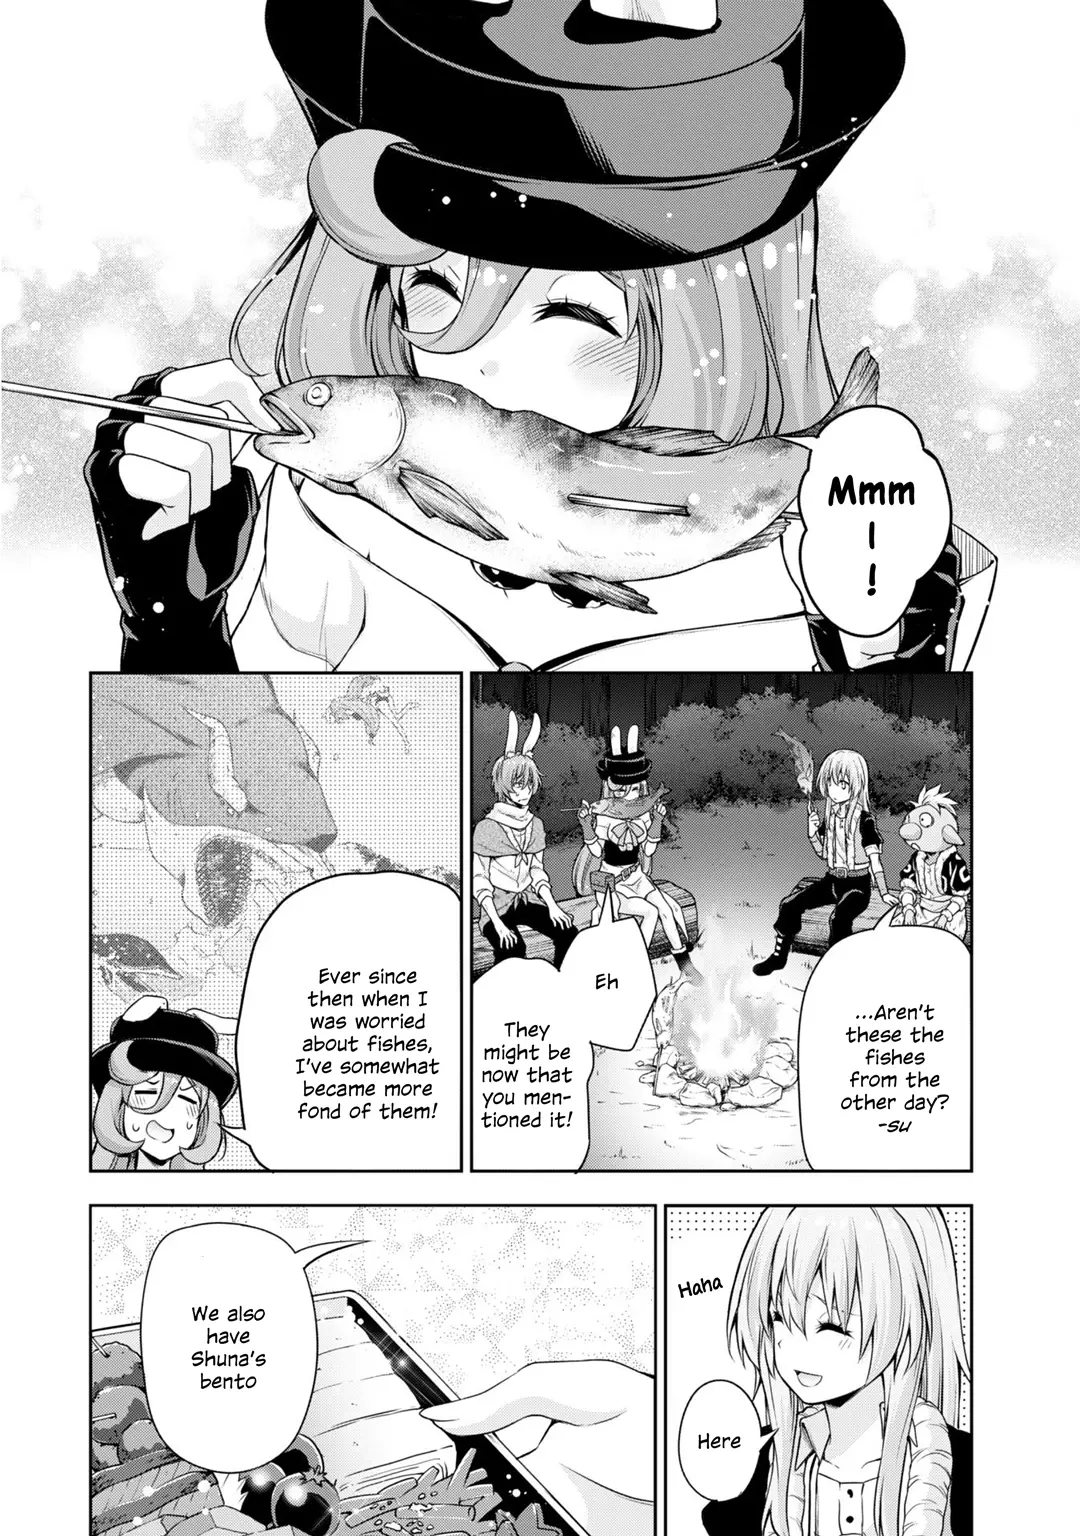 Tensei Shitara Slime Datta Ken: The Ways of Strolling in the Demon Country - 38 page 14